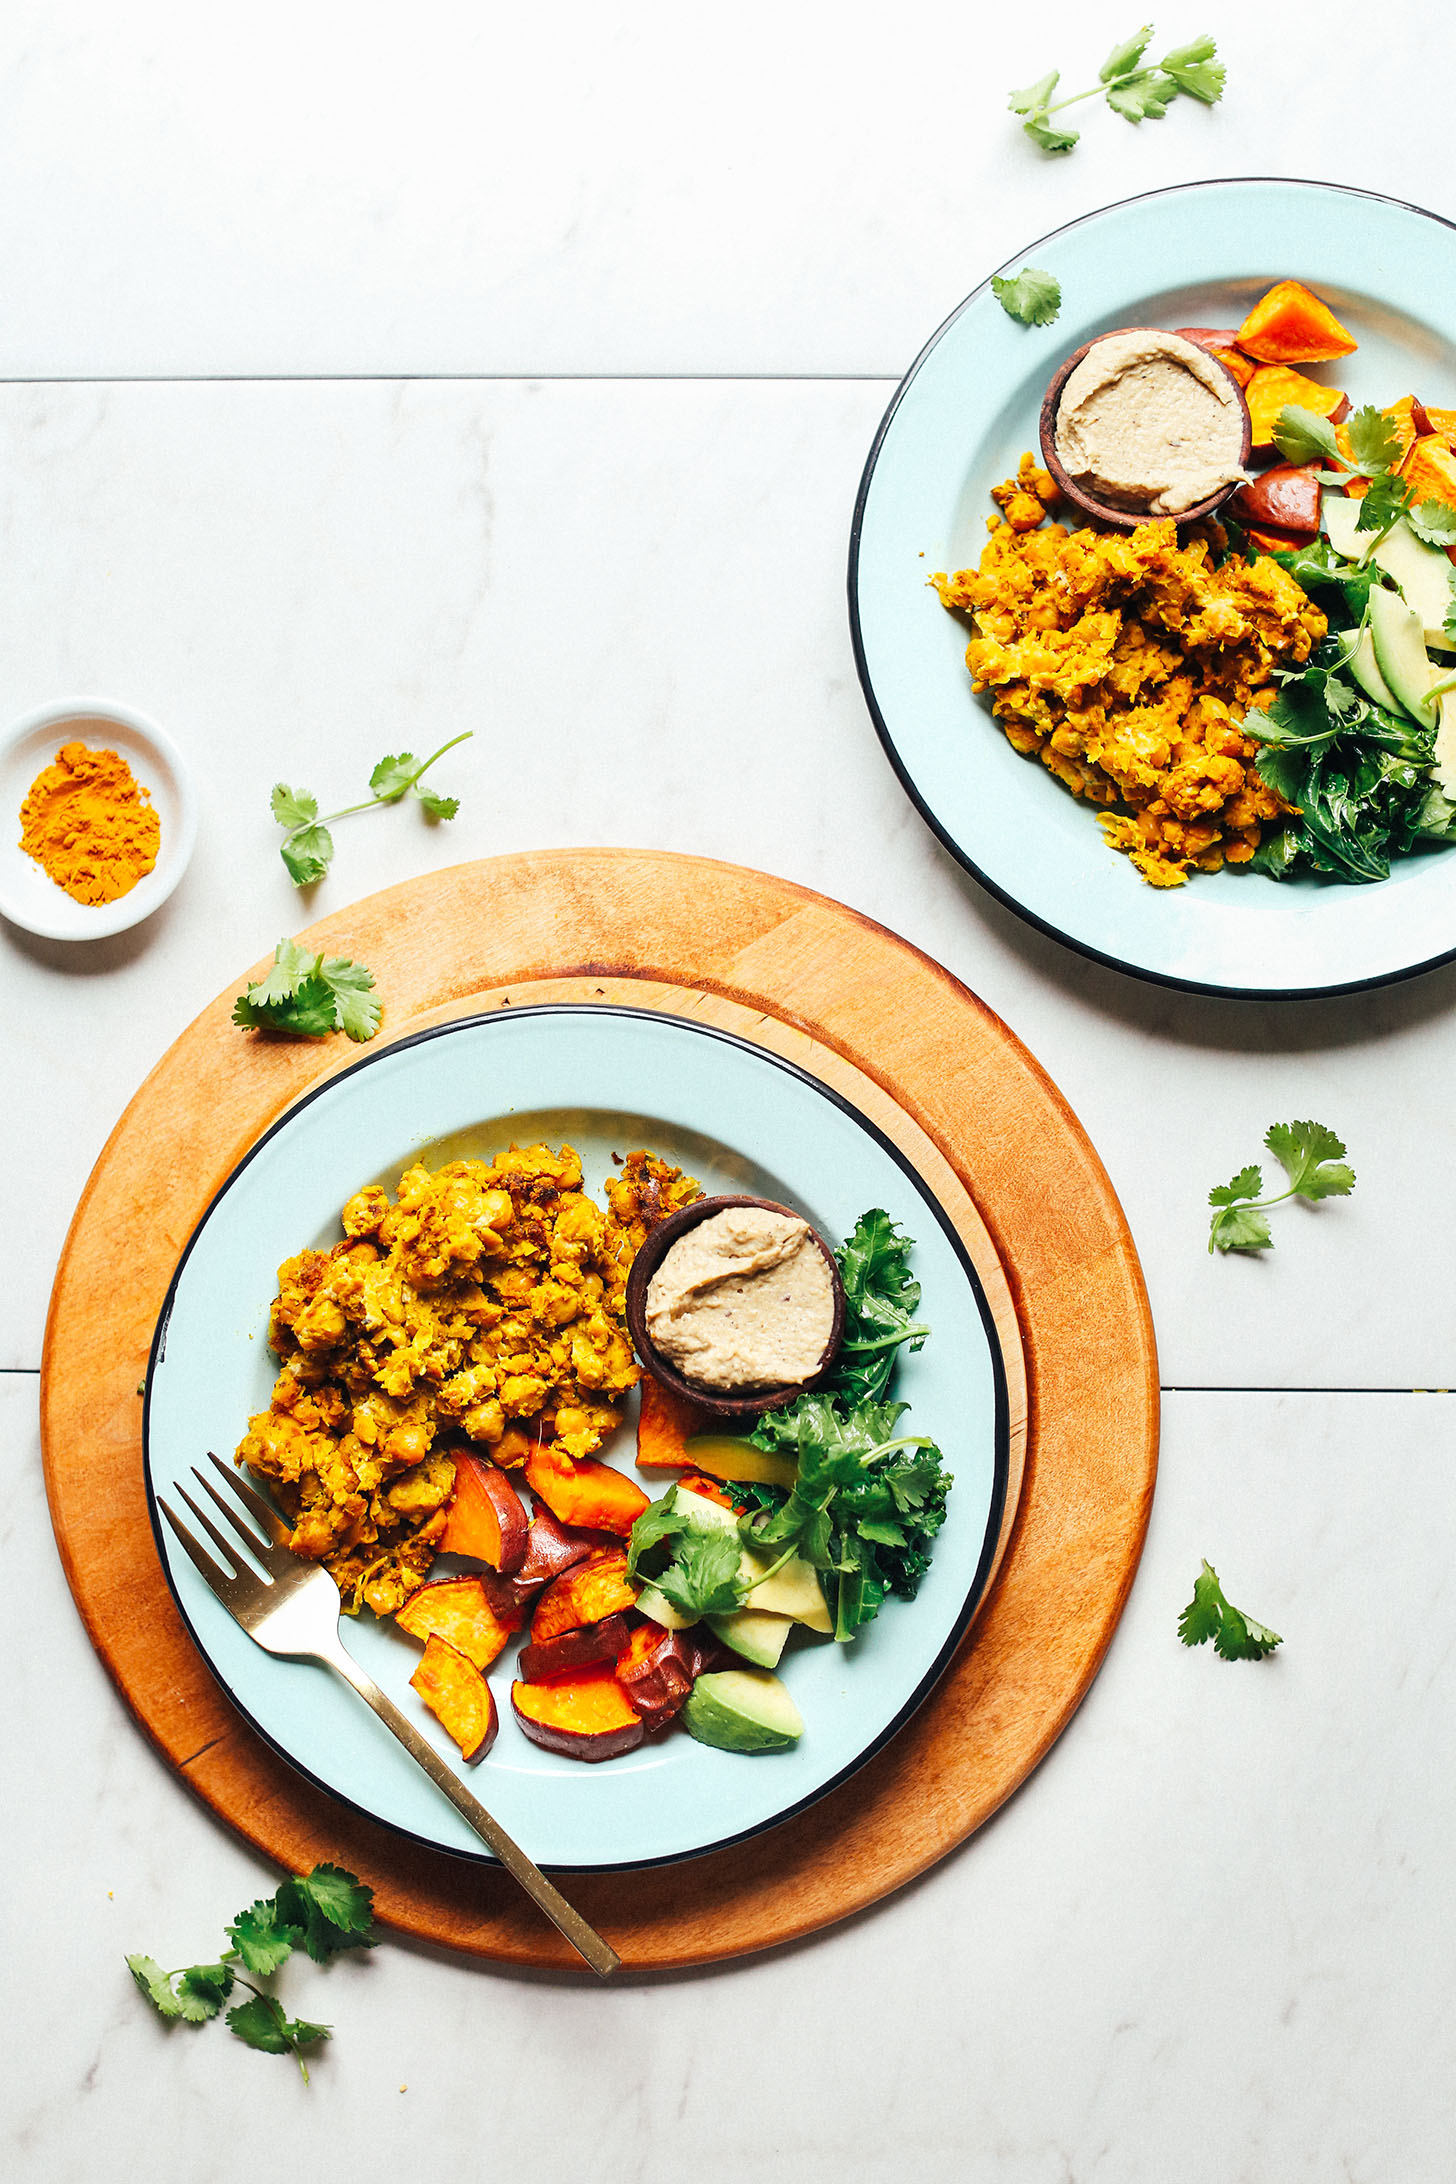 Plate with delicious Chickpea Scramble, roasted sweet potatoes, avocado, cilantro, and baba ghanoush